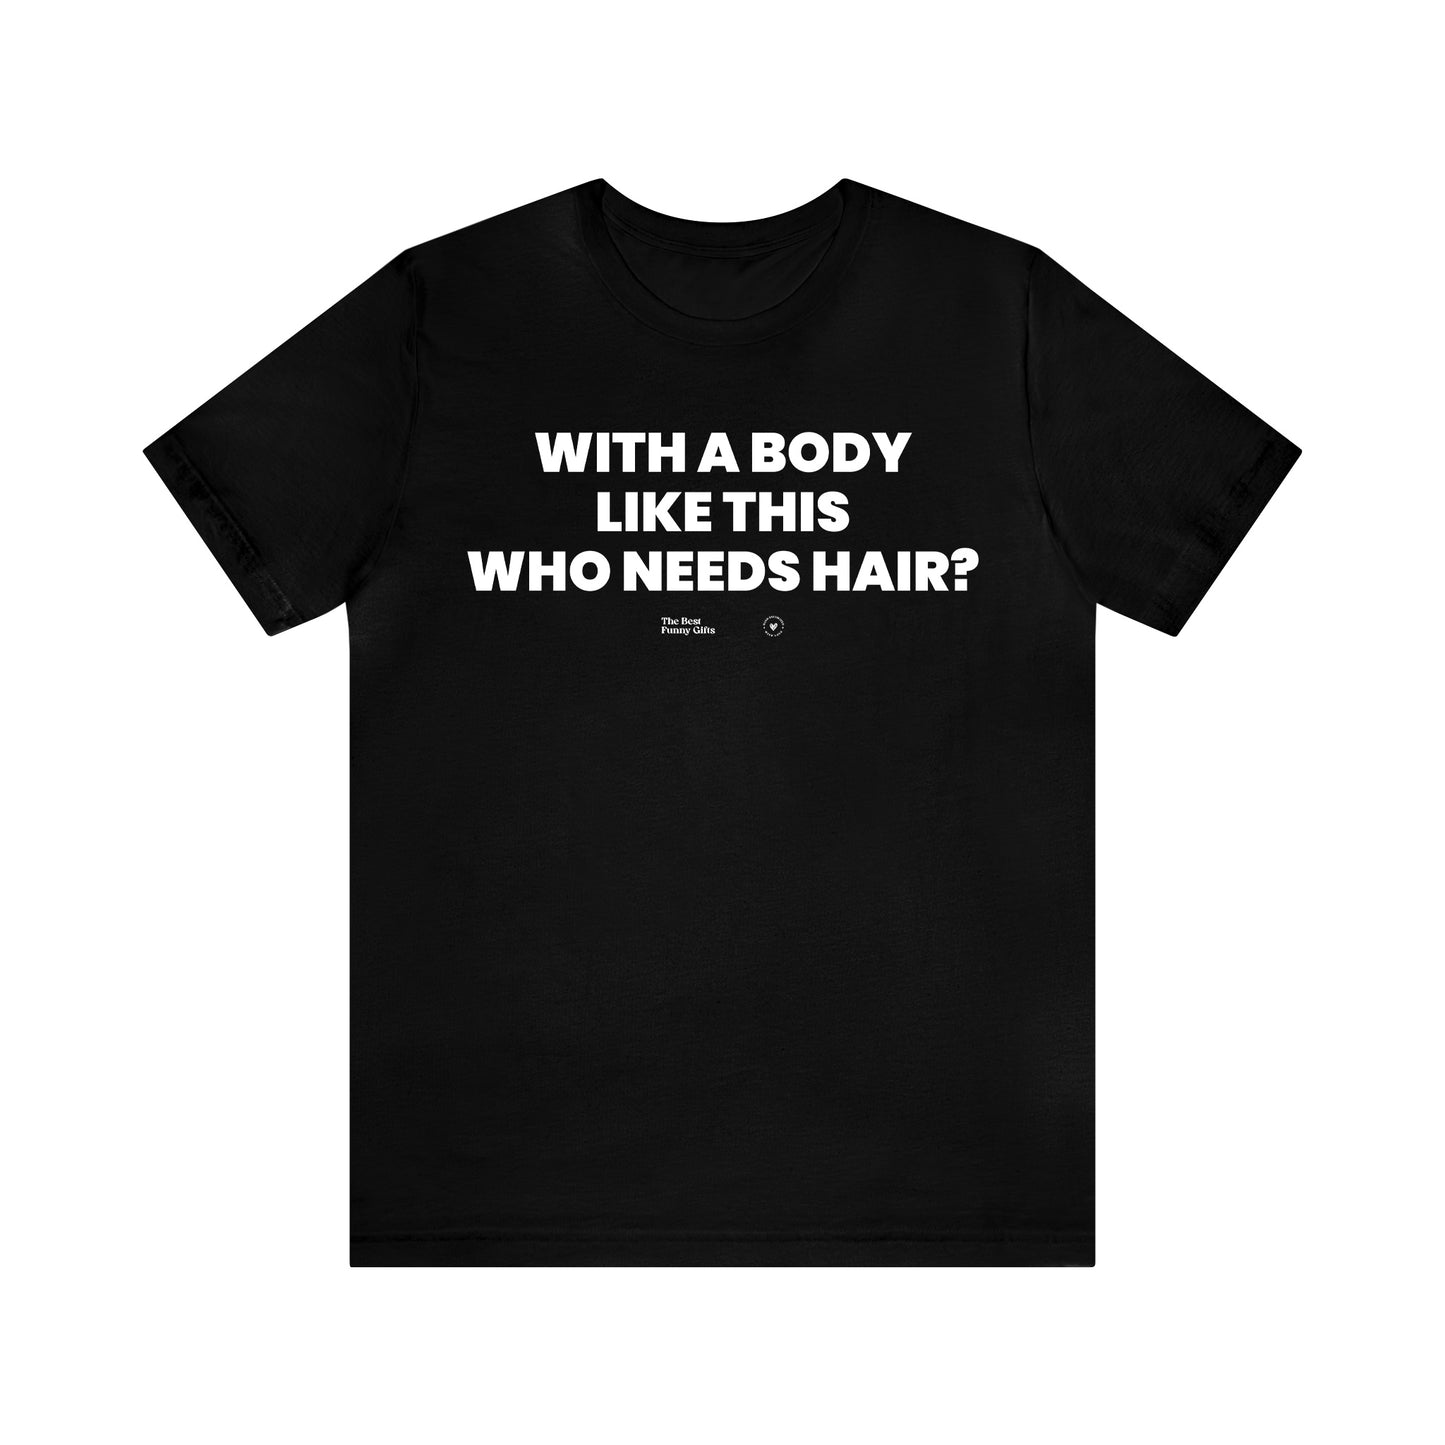 Mens T Shirts - With a Body Like This Who Needs Hair - Funny Men T Shirts